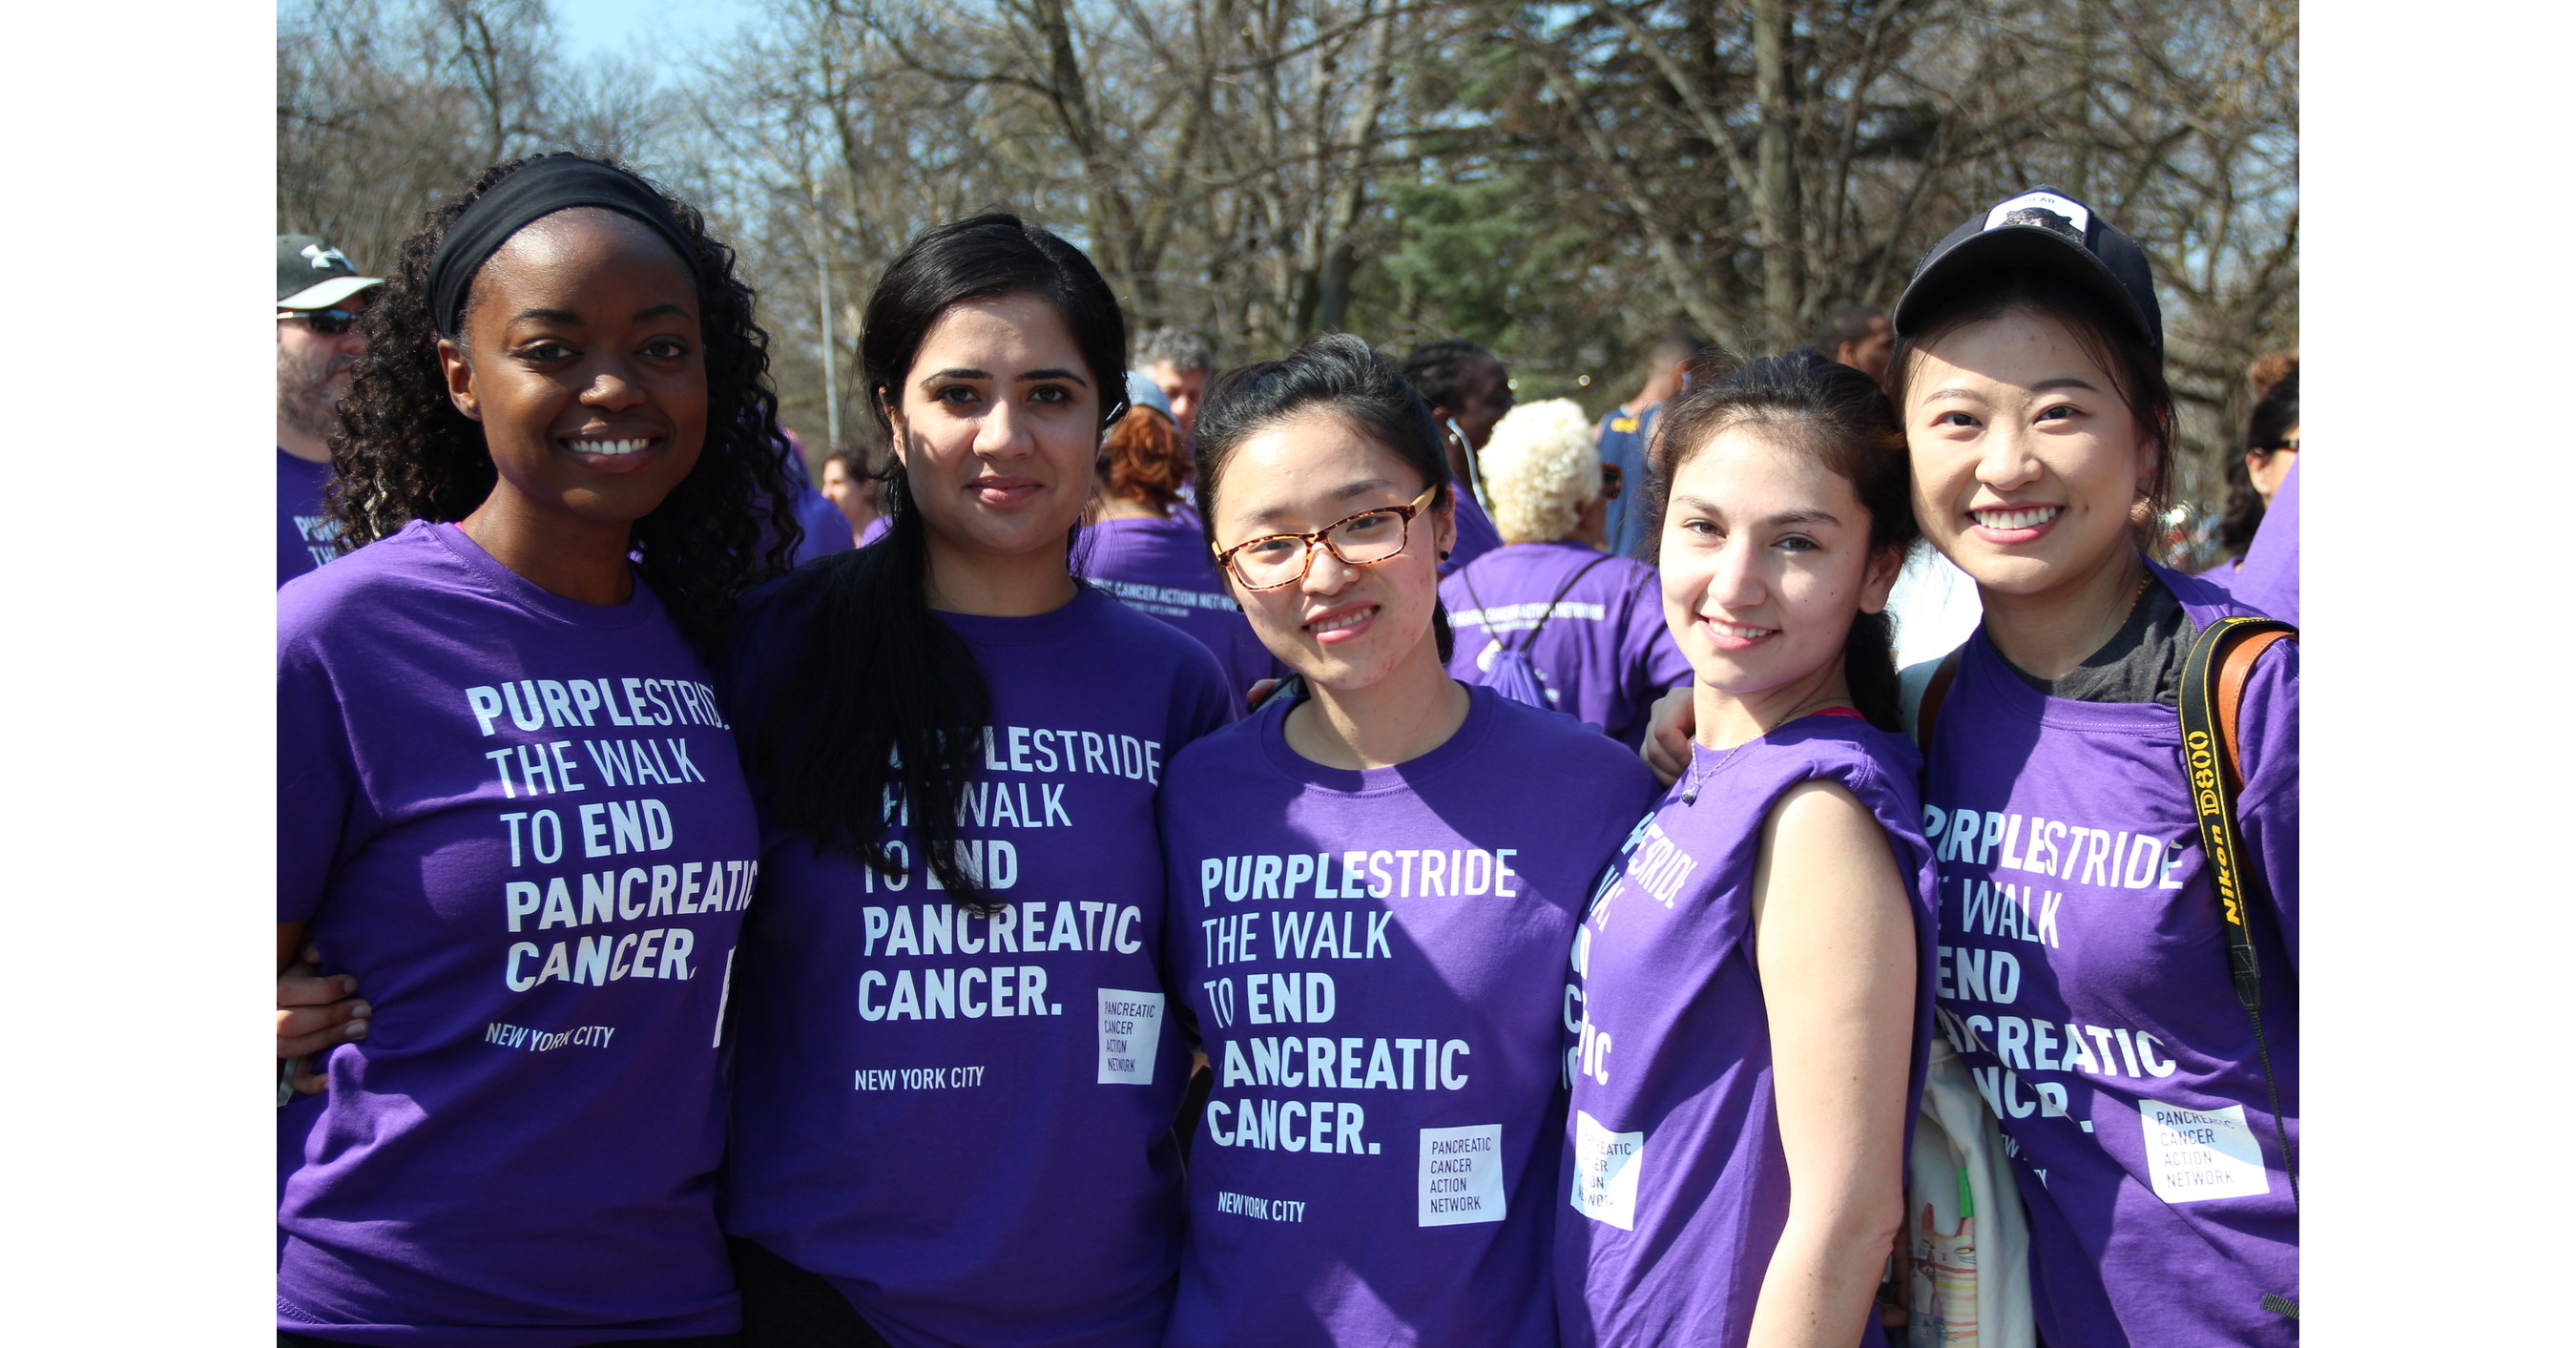 New York City Will Walk To End Pancreatic Cancer At Its 10th Annual